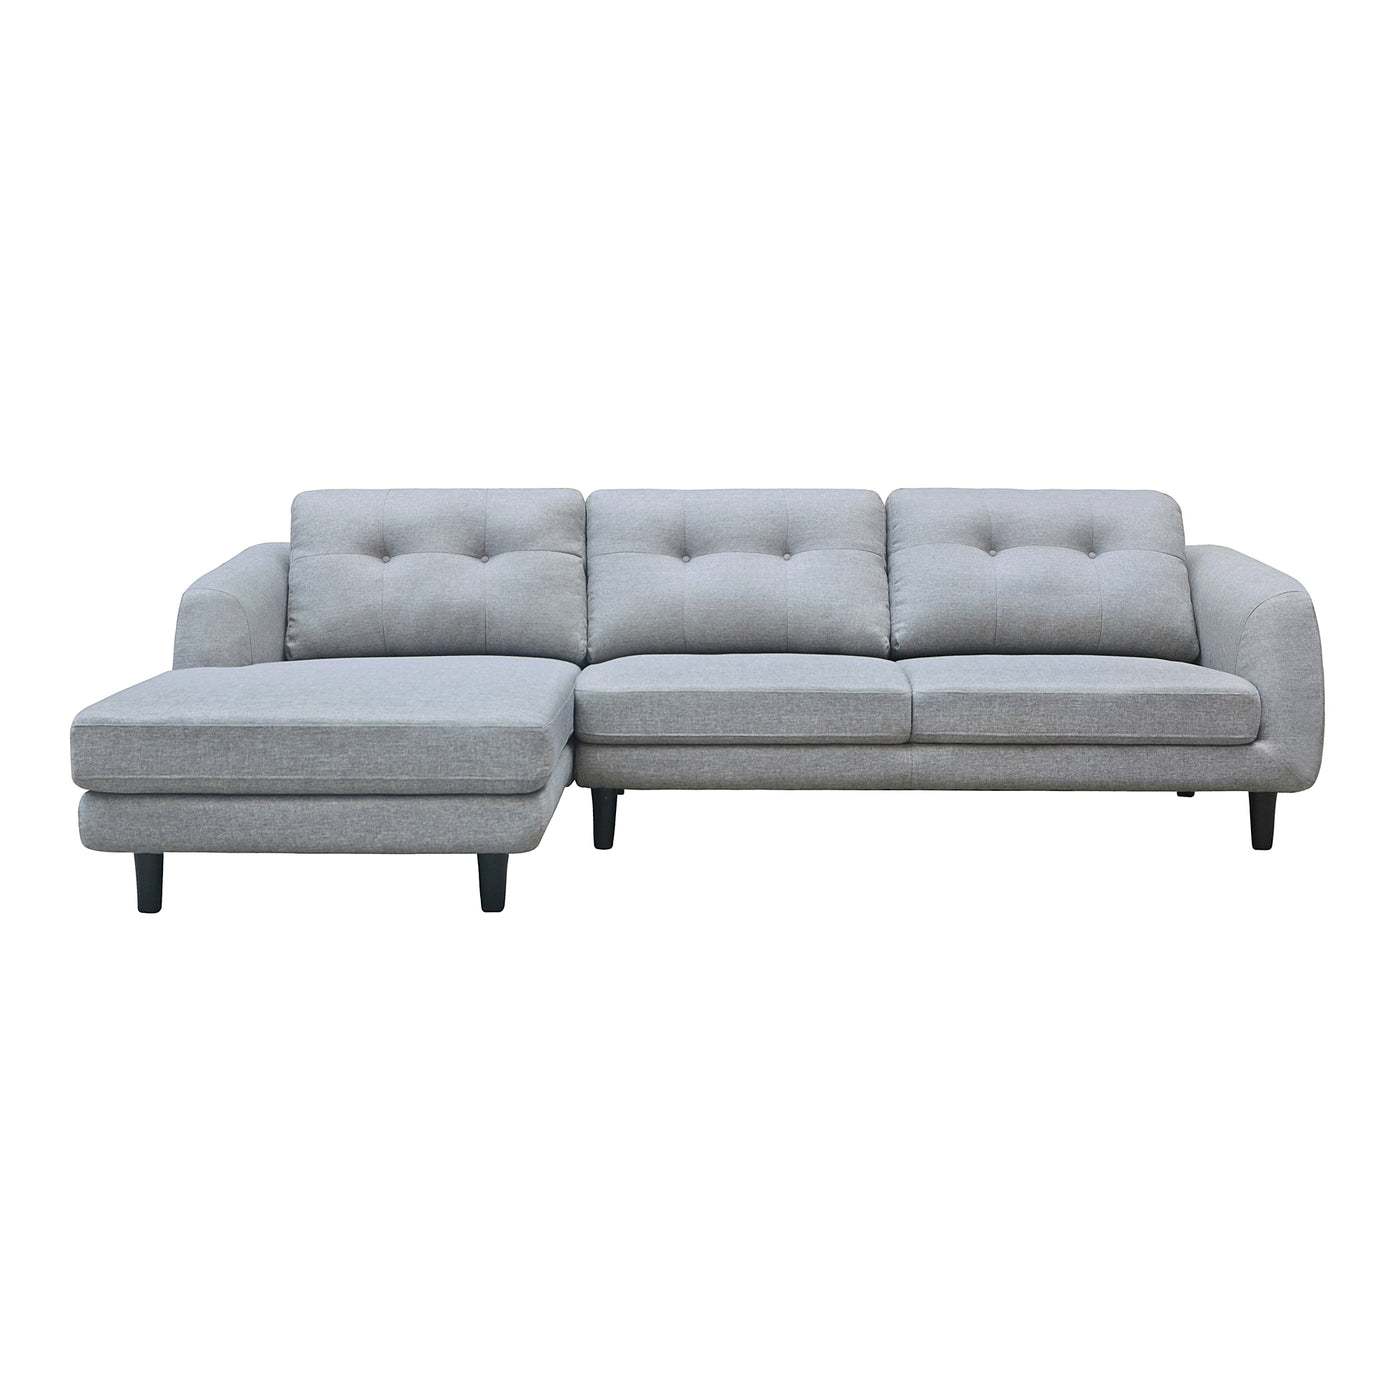 The Corey is a sophisticated sofa chaise with finely tailored upholstery, loose back cushions and solid wood legs. Availab...